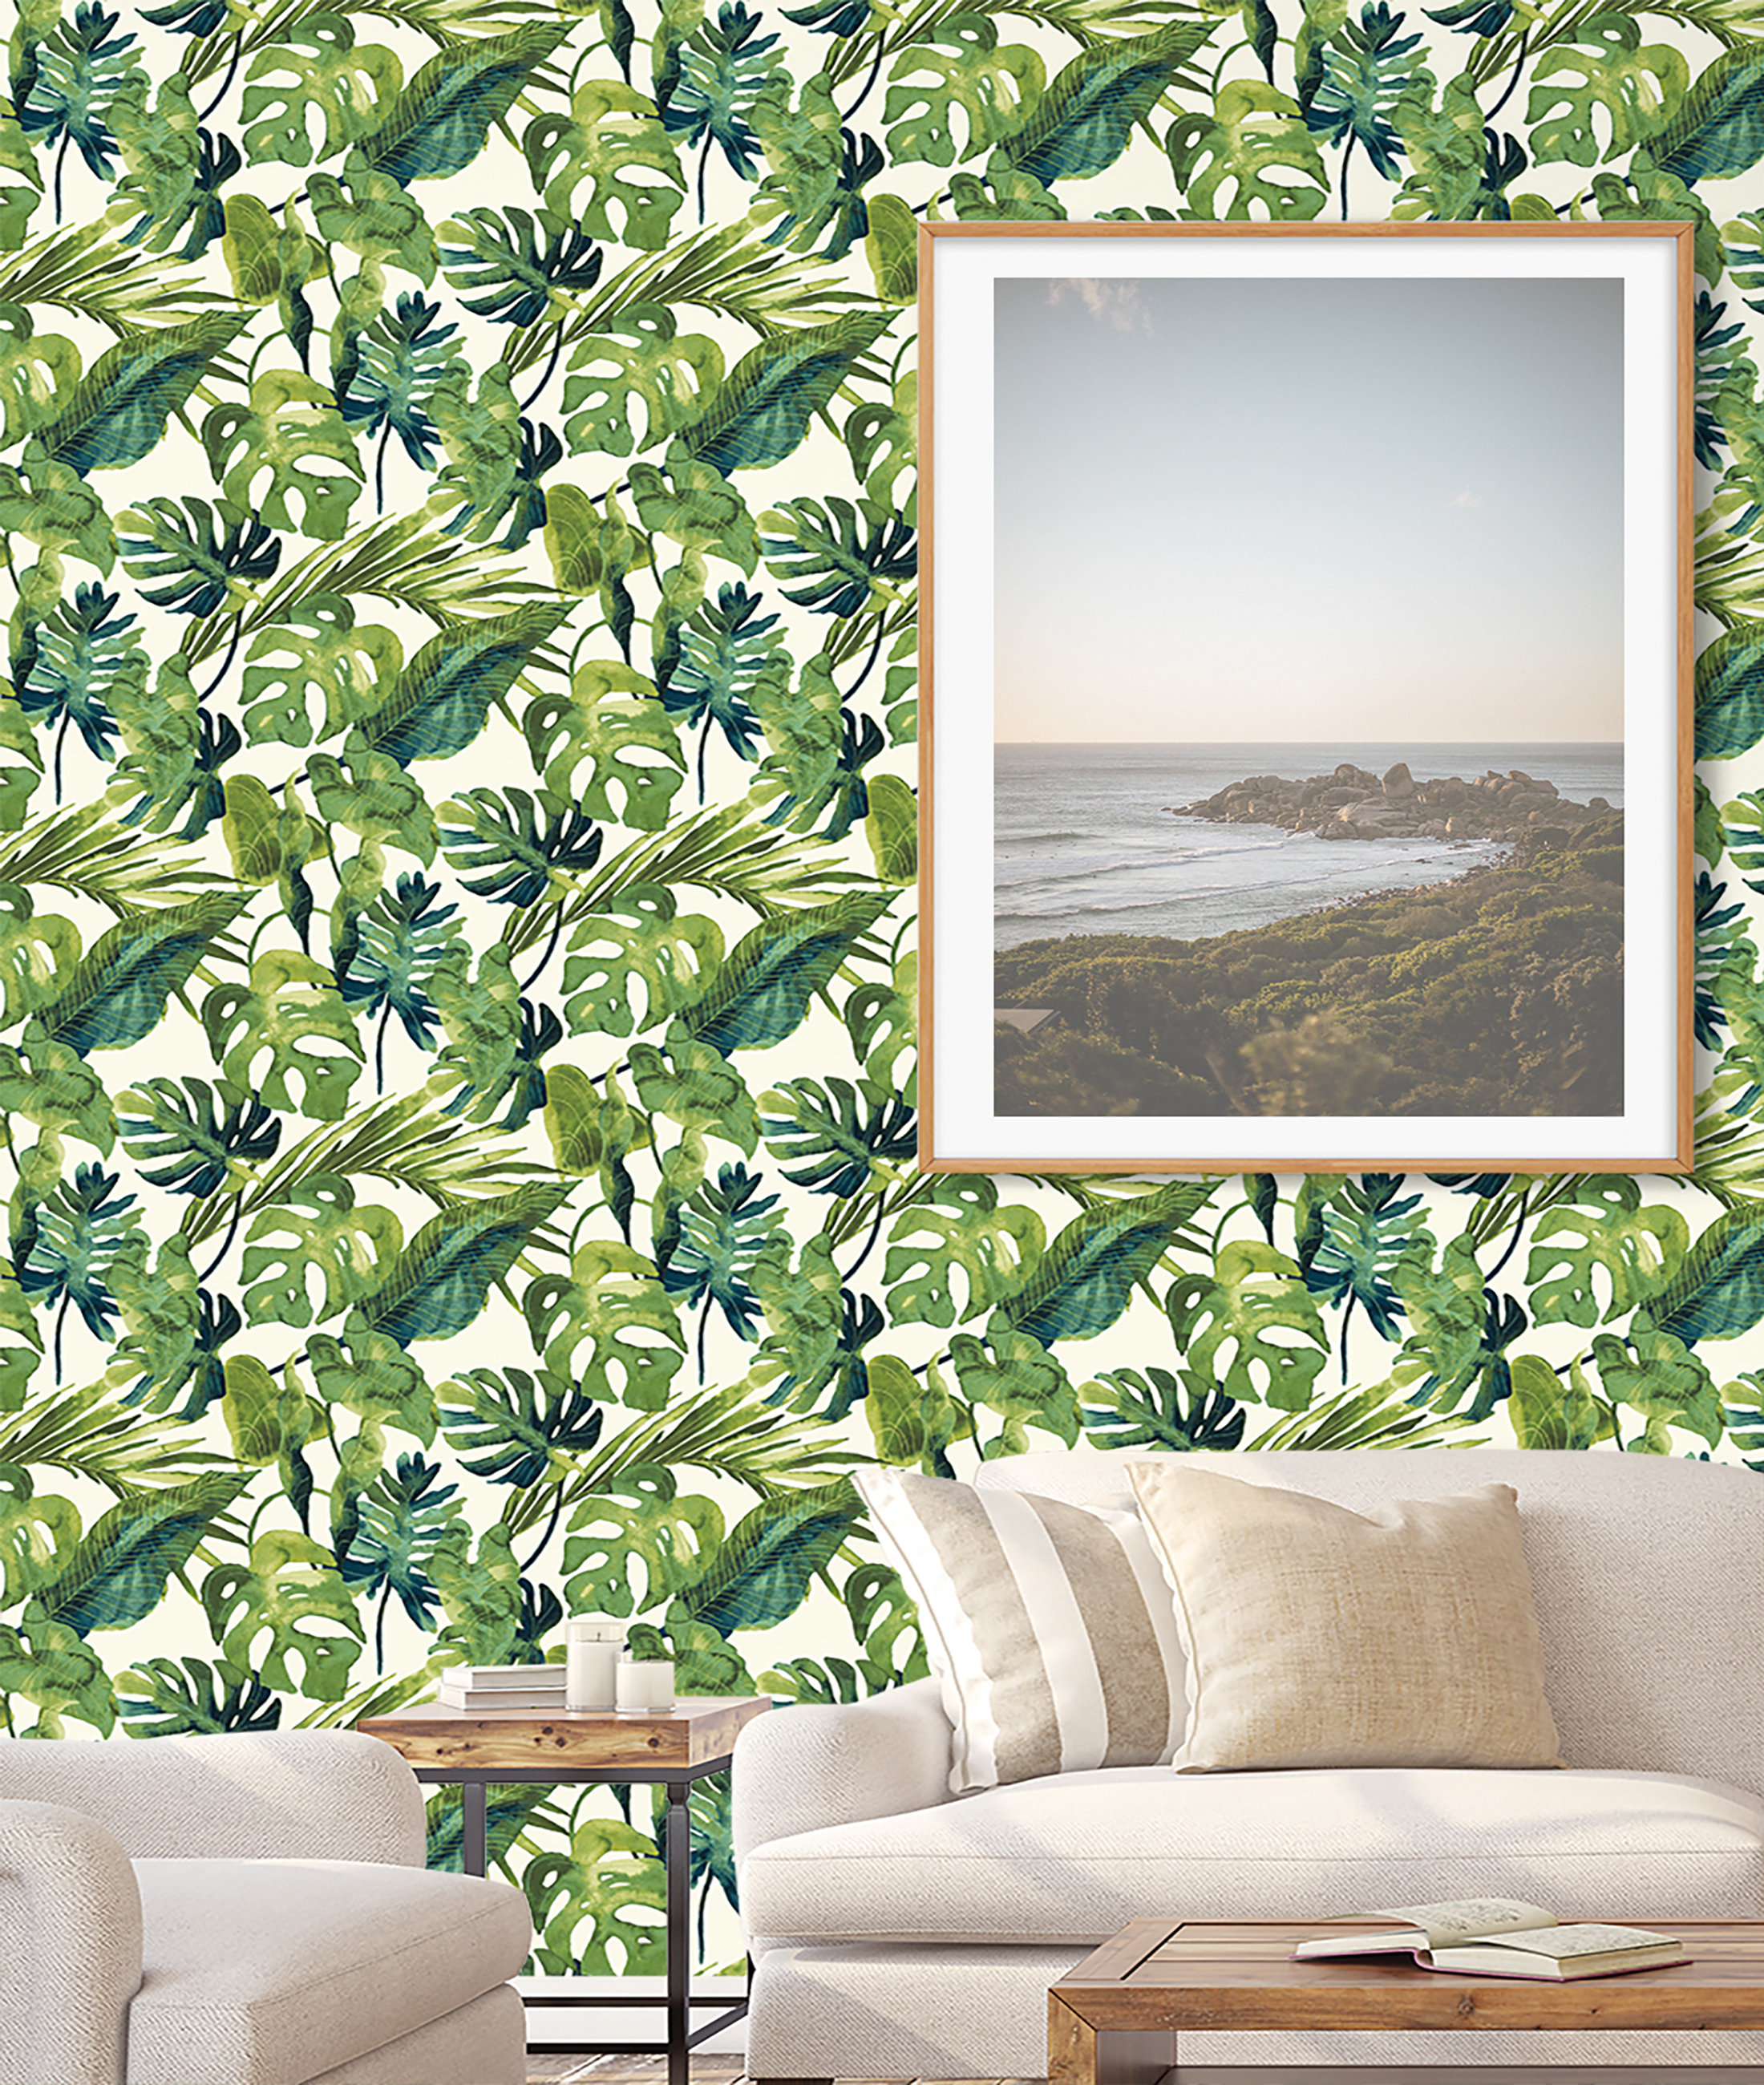 Tommy Bahama Palmiers Aloe Vinyl Peel  Stick Wallpaper Roll Covers 3075  Sq Ft 802802WR  The Home Depot